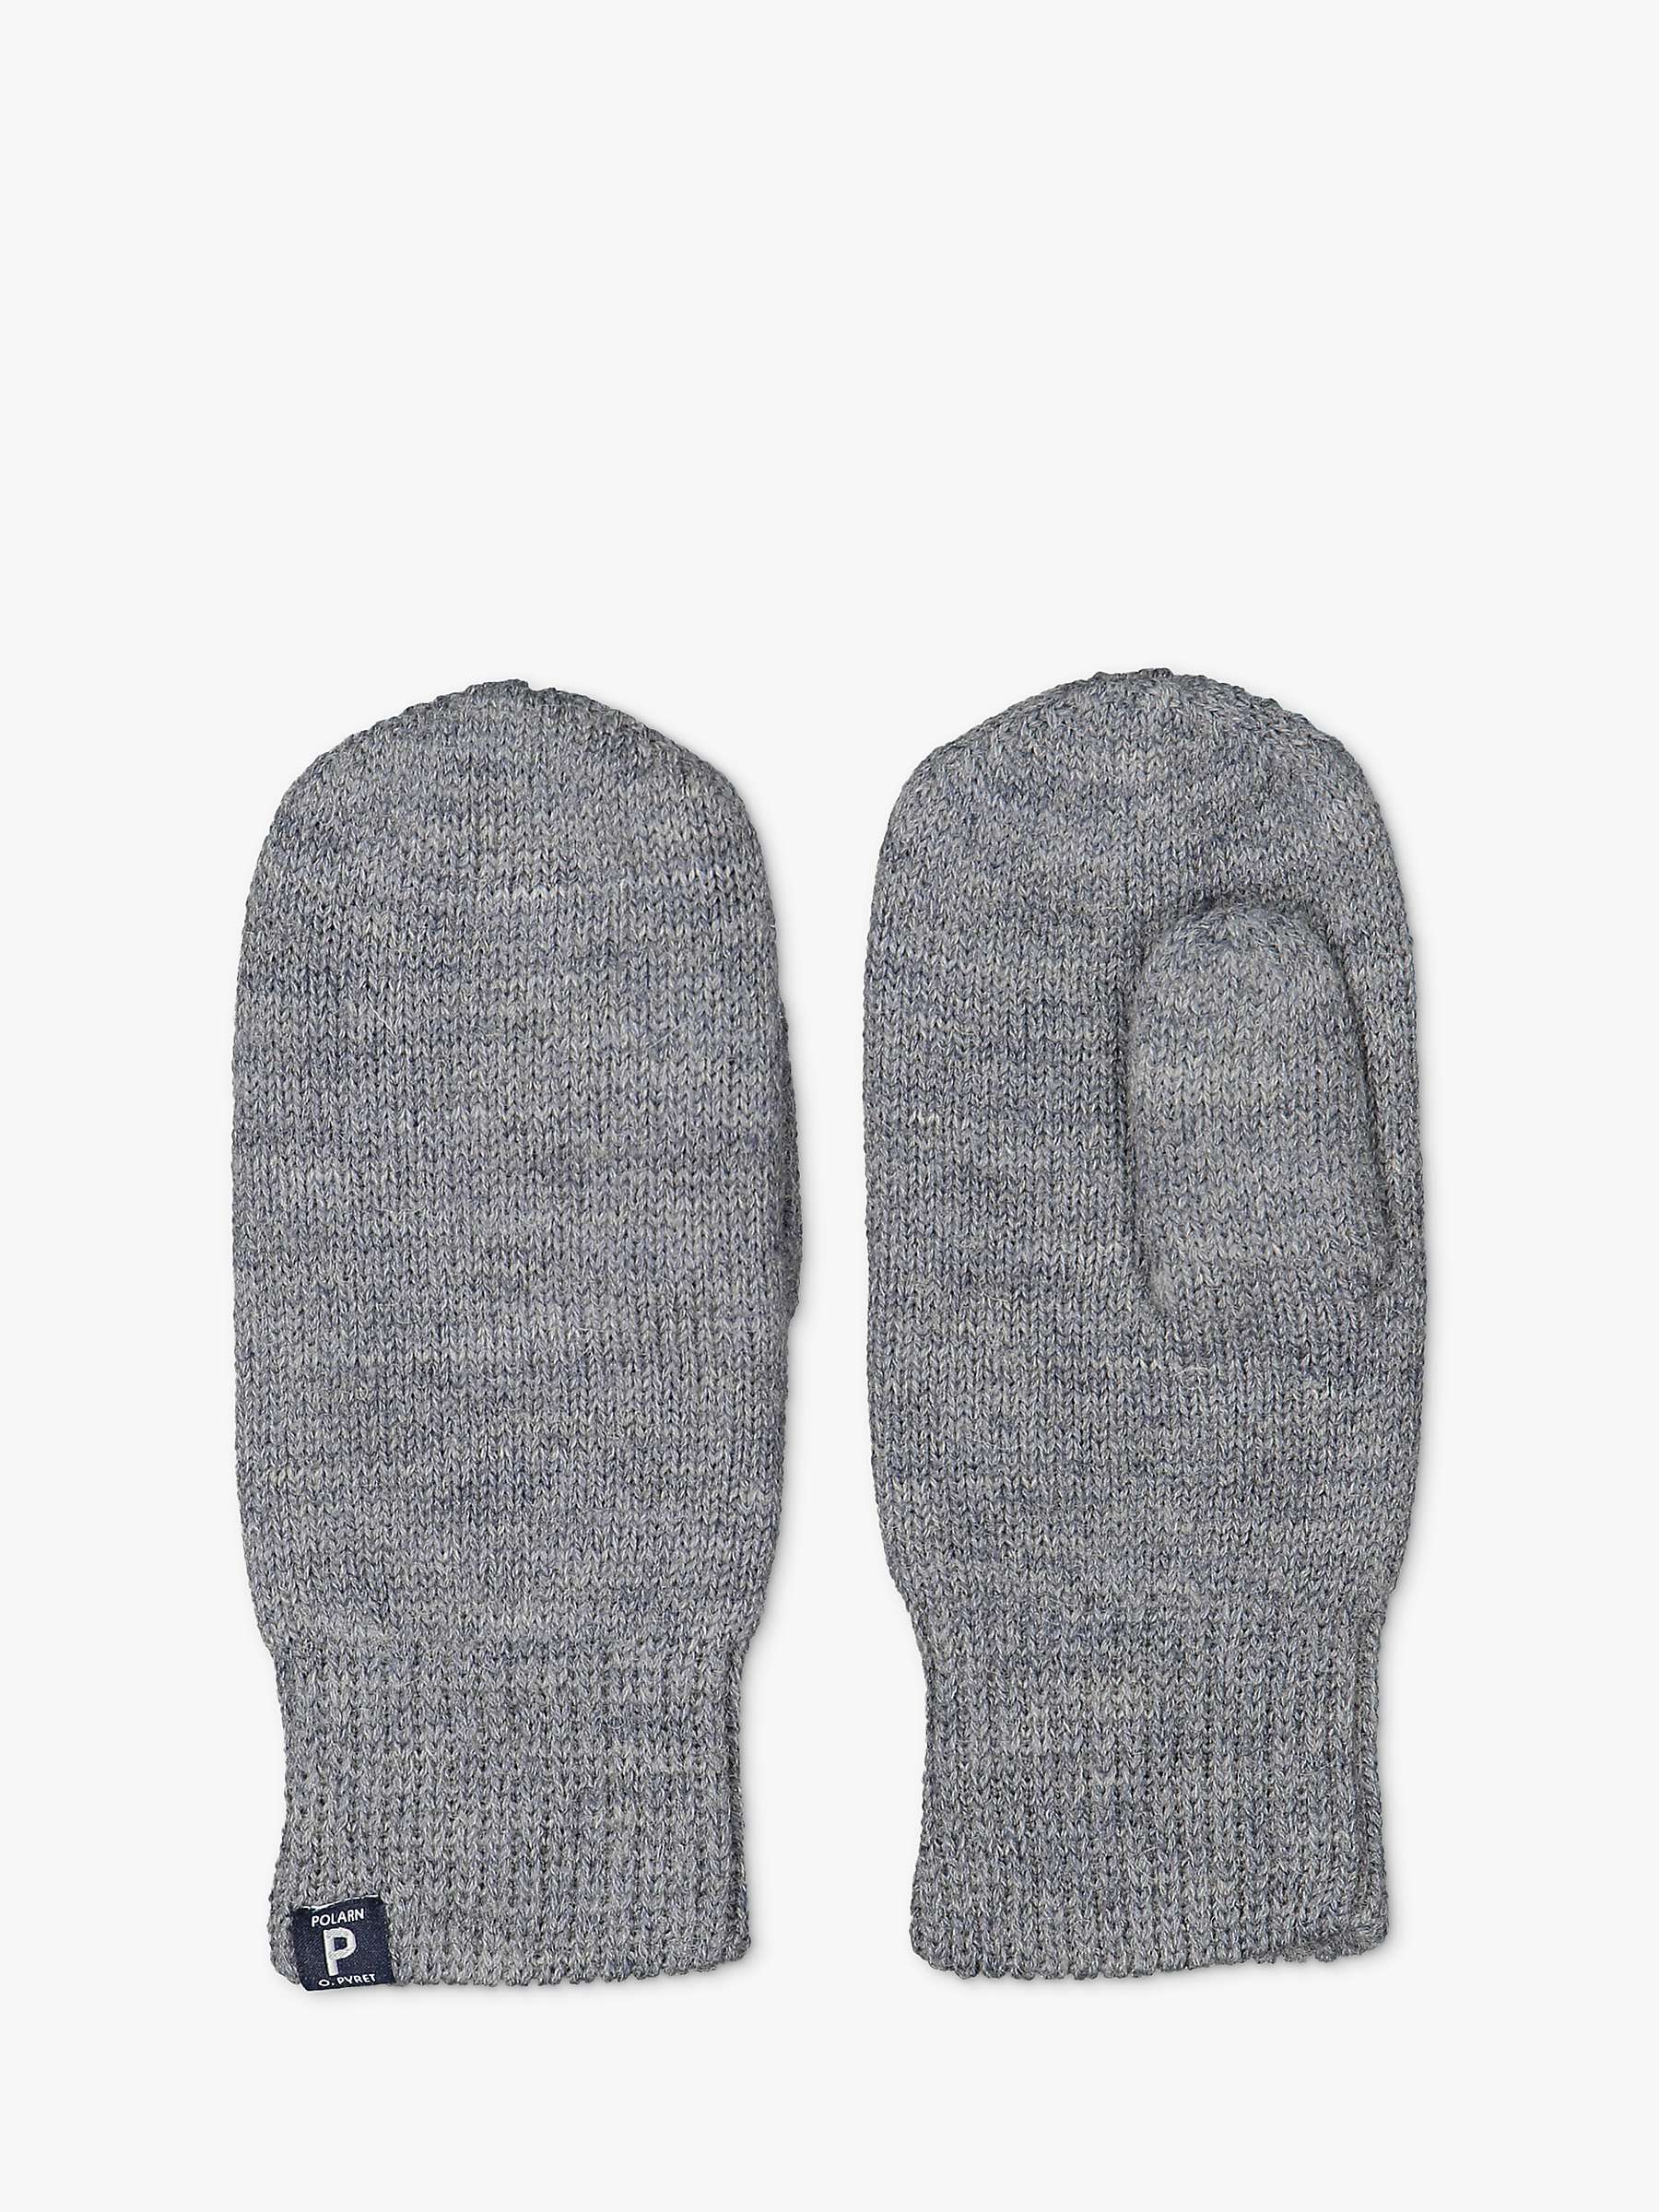 Buy Polarn O. Pyret Baby Wool Mittens Online at johnlewis.com